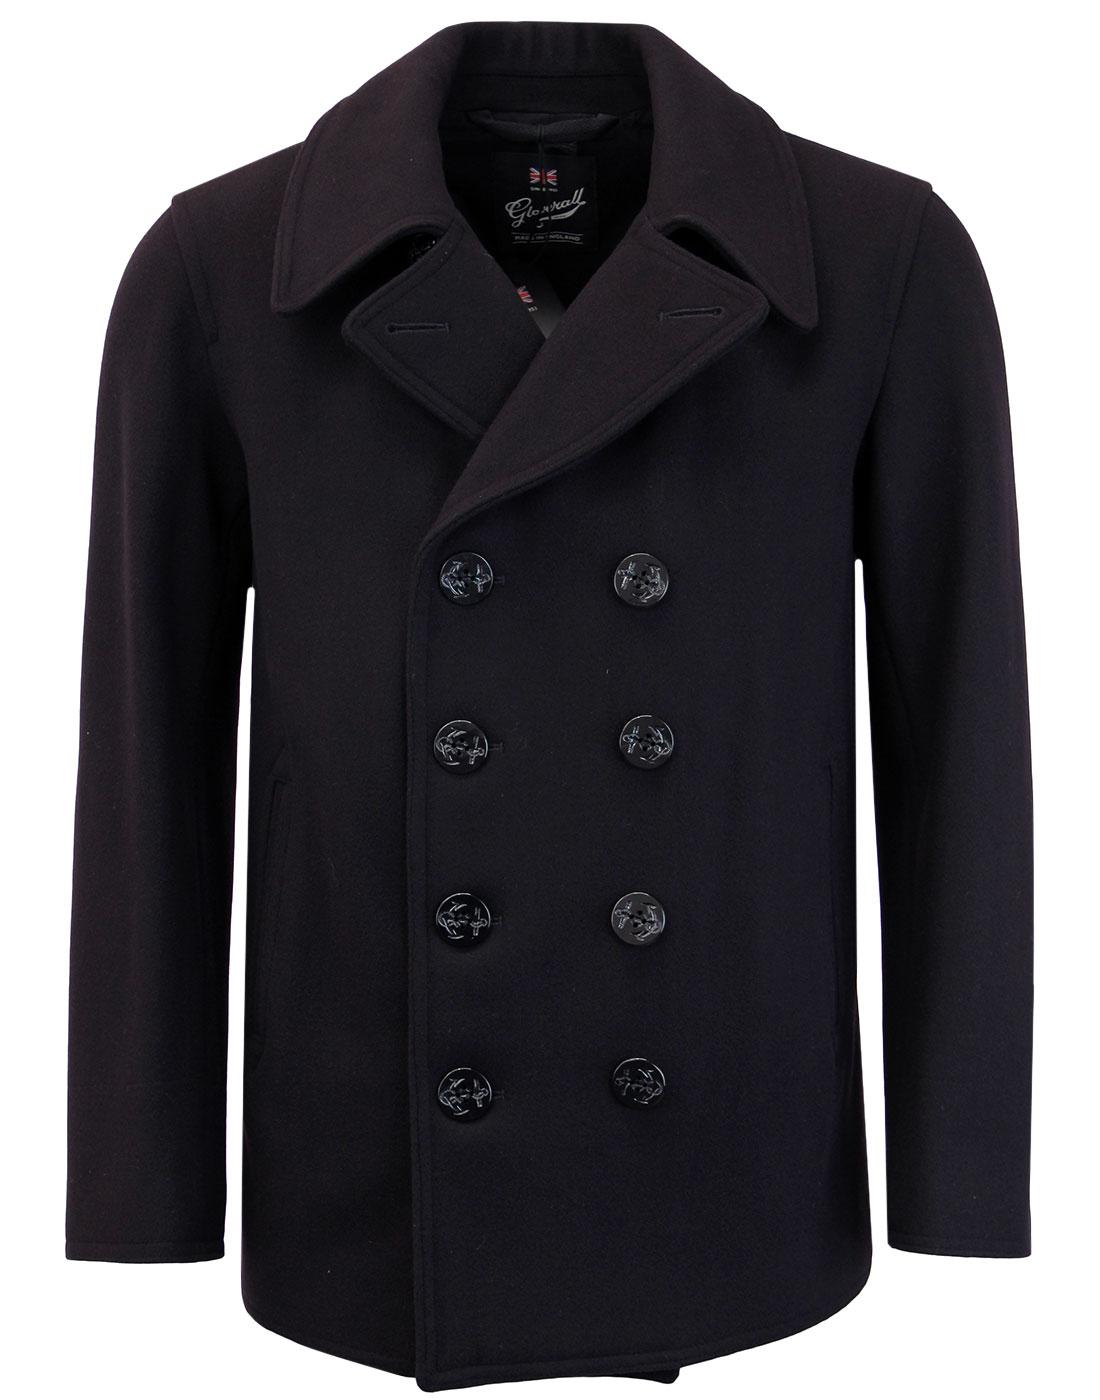 Gloverall Made in England Mod Admiralty Contemporary Peacoat Navy